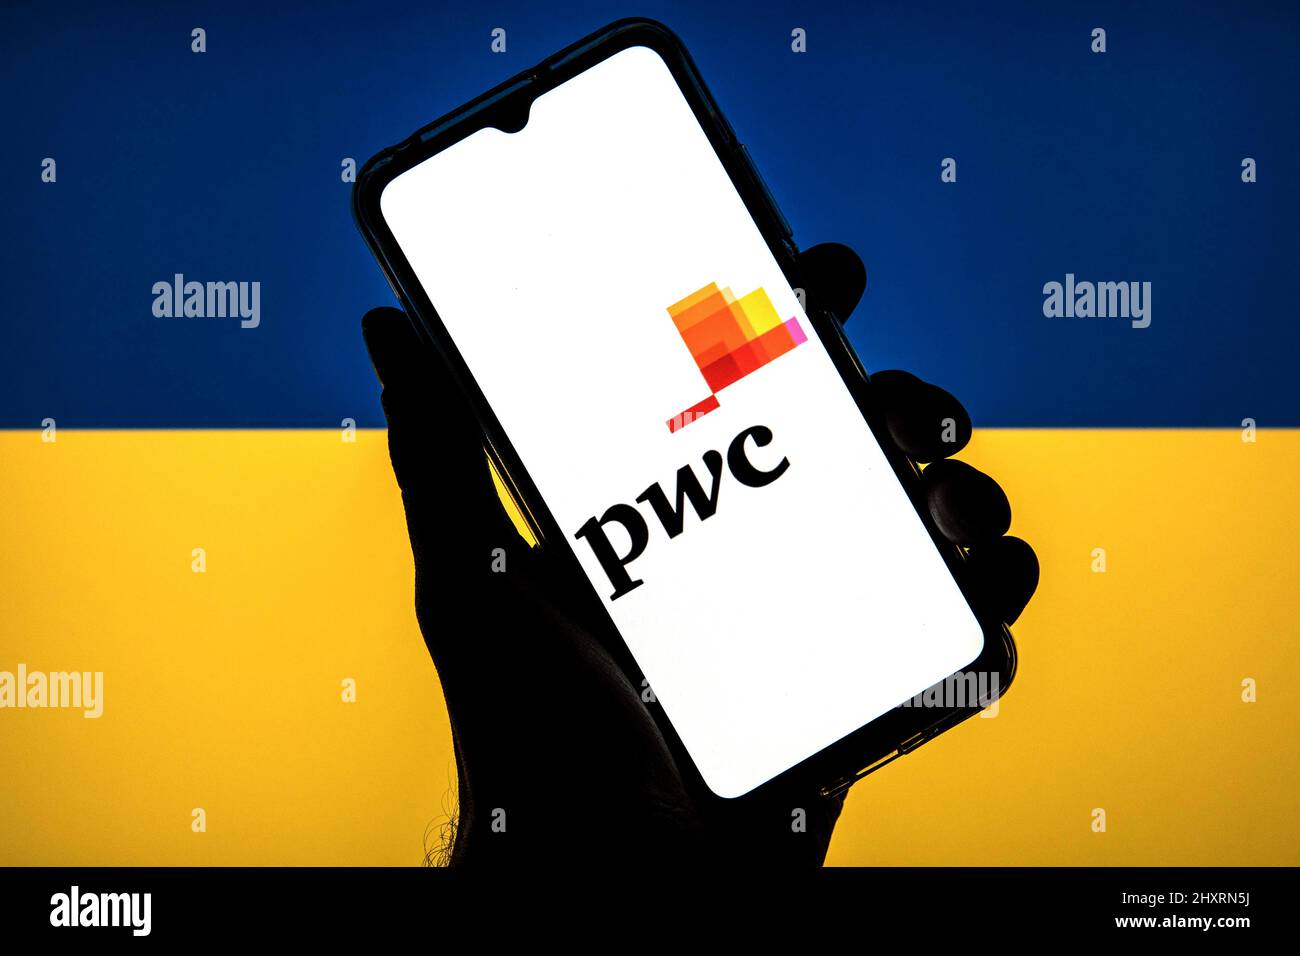 PwC, the 'elephant standing in plain sight', for cyber incident response,  according to leading independent analyst firm Aite-Novarica